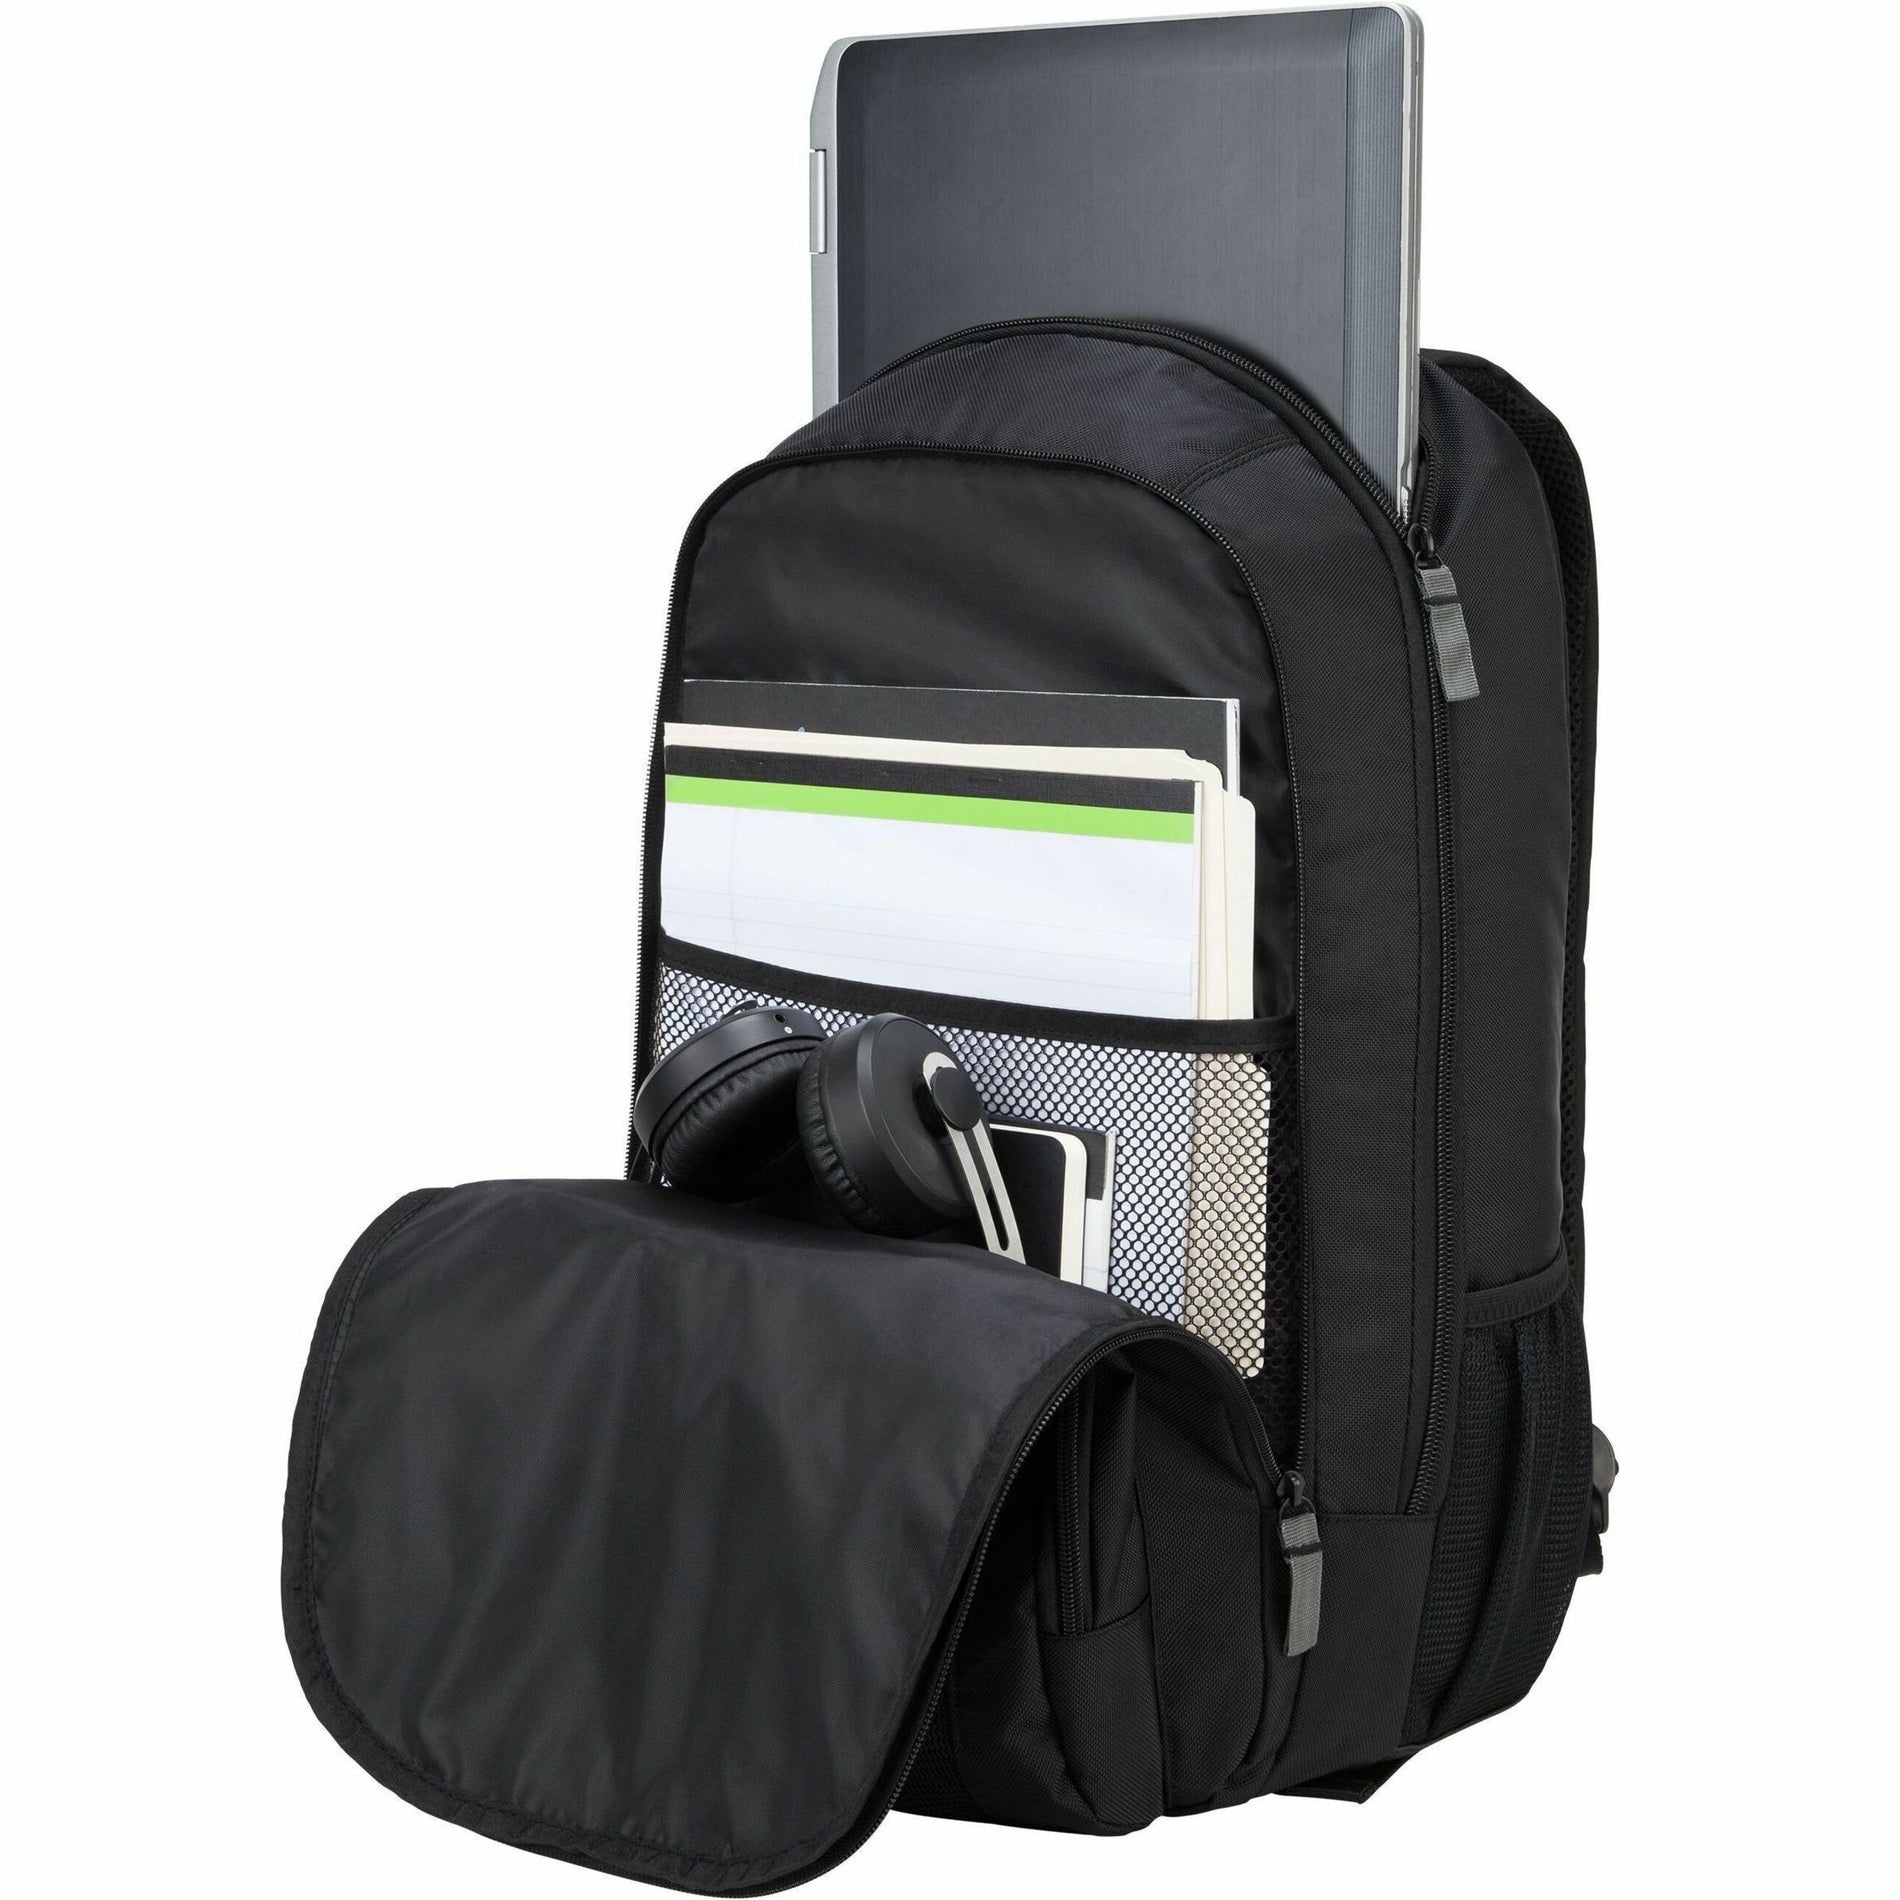 Targus CVR617 17" Groove Backpack, Black - Durable, Stylish, and Spacious Carrying Case